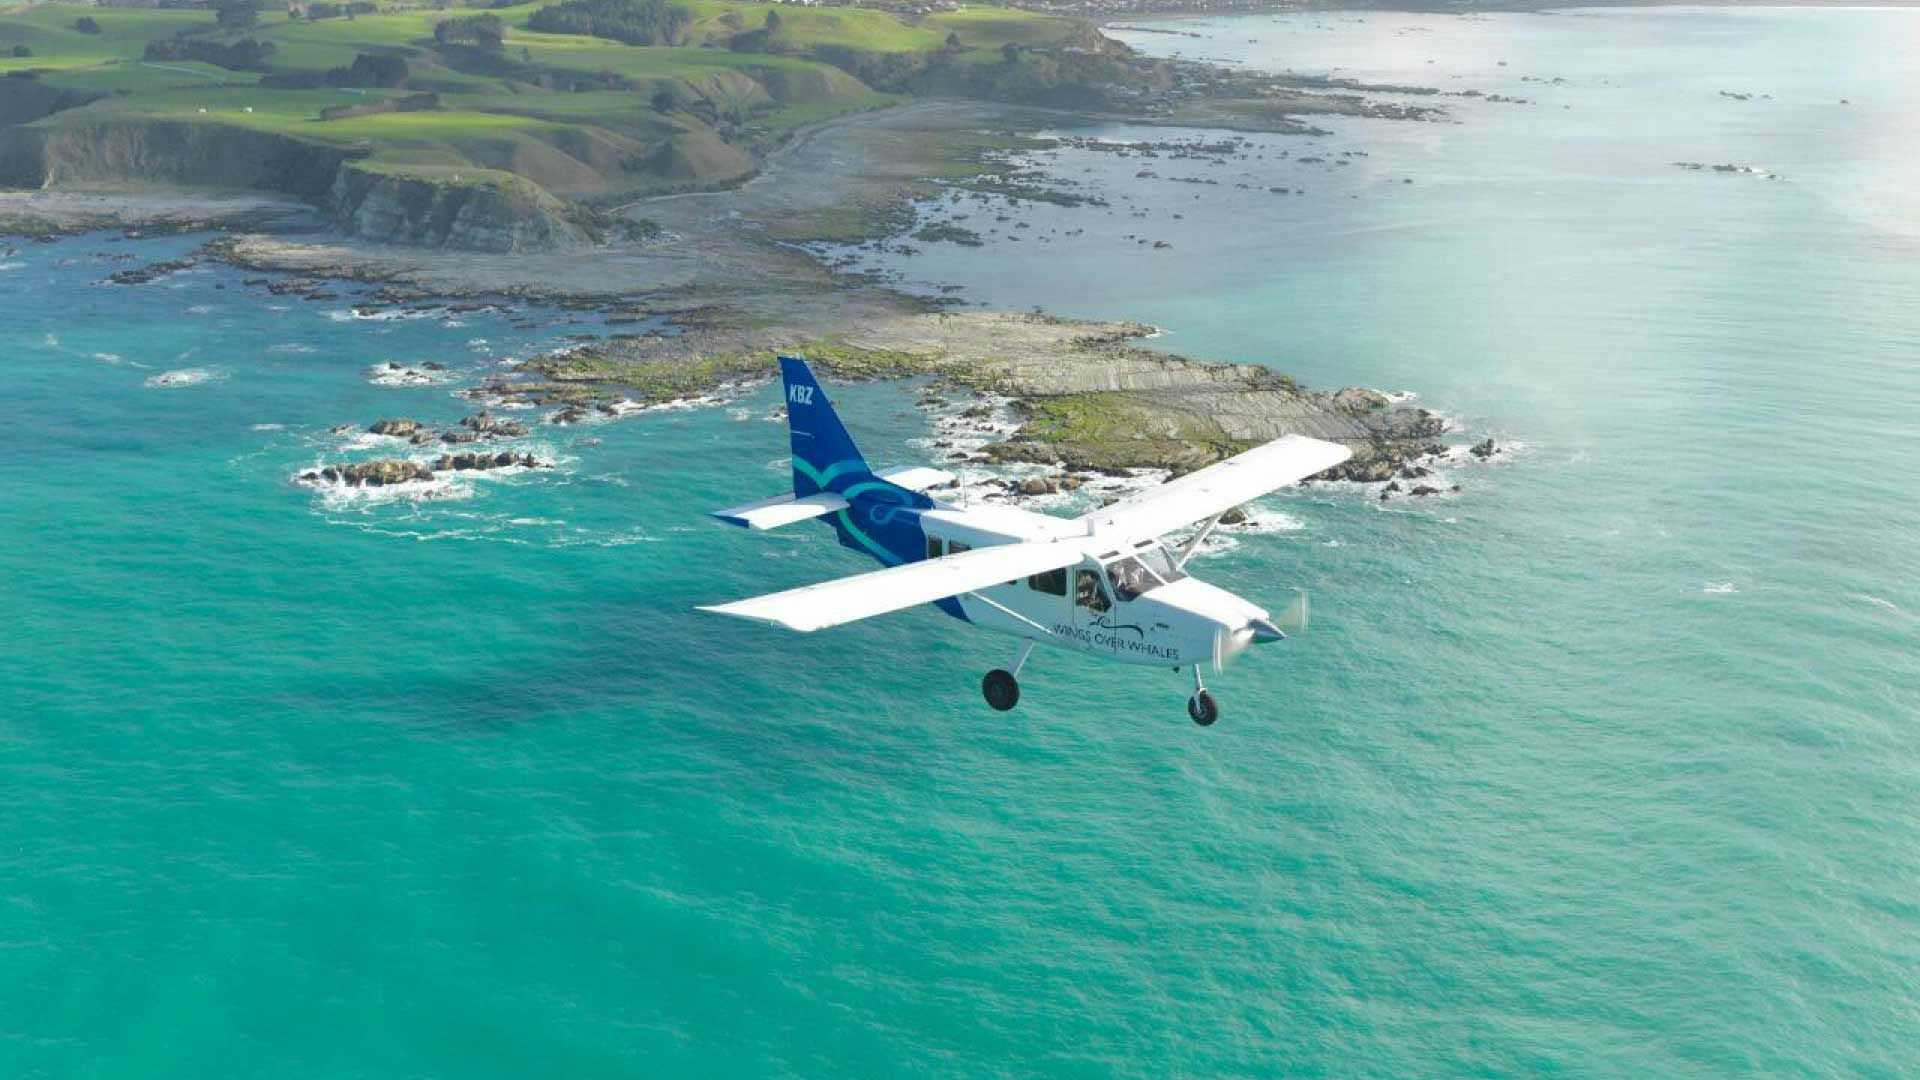 Small aircraft flying over the water in Kaikoura